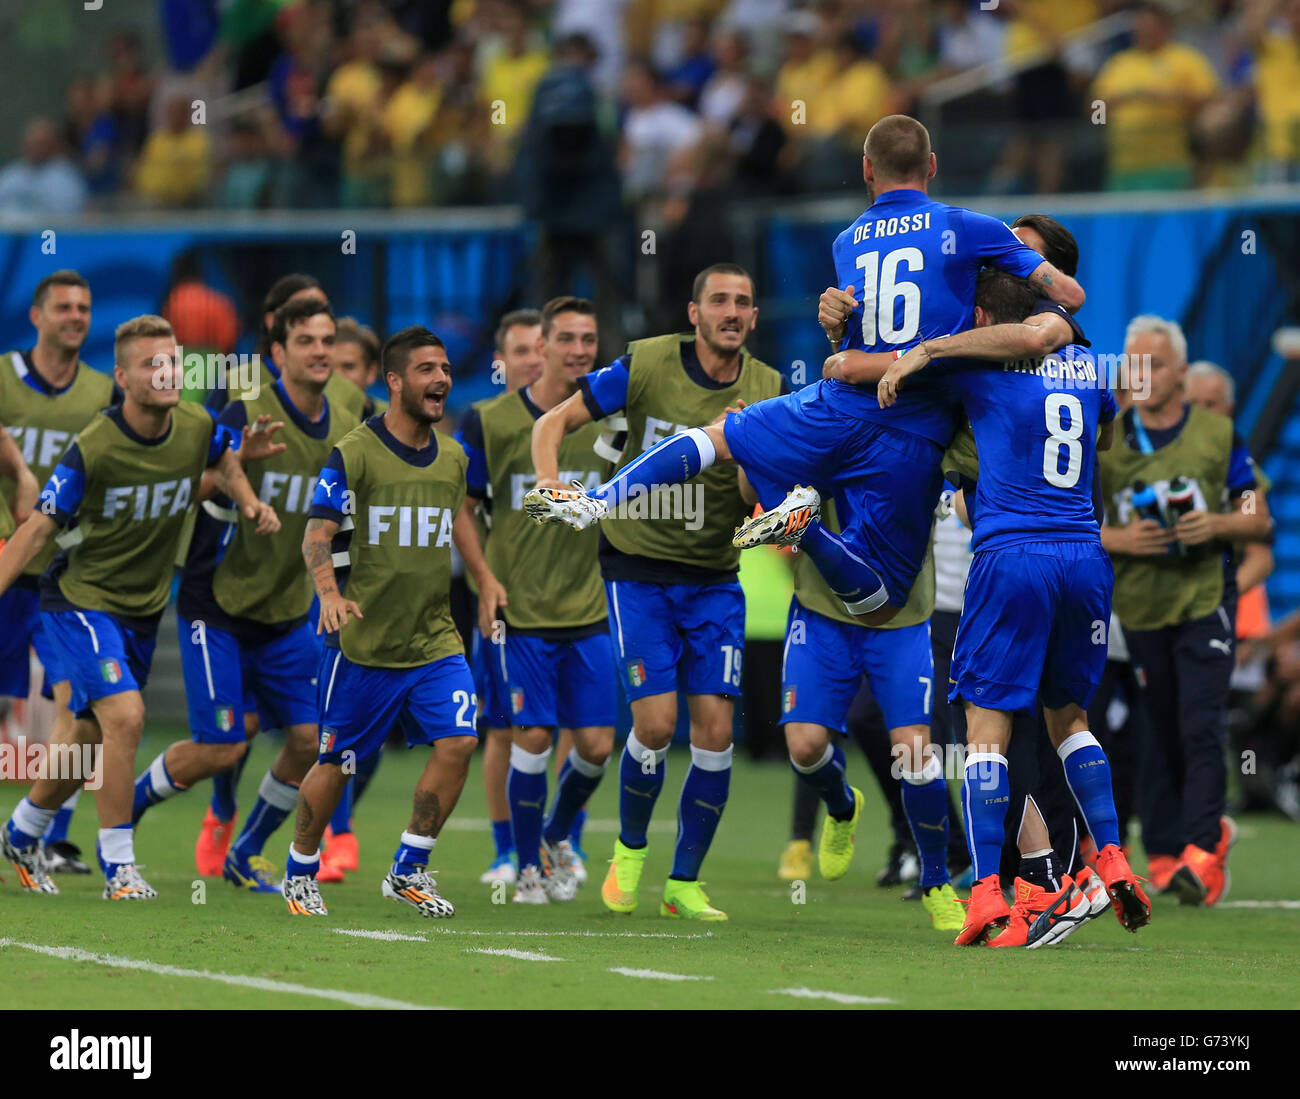 Italy's Claudio Marchisio (8) celebrates scoring his side's first goal of the game with team-mates during the FIFA World Cup, Group D match at the Arena da Amazonia, Manaus, Brazil. Stock Photo